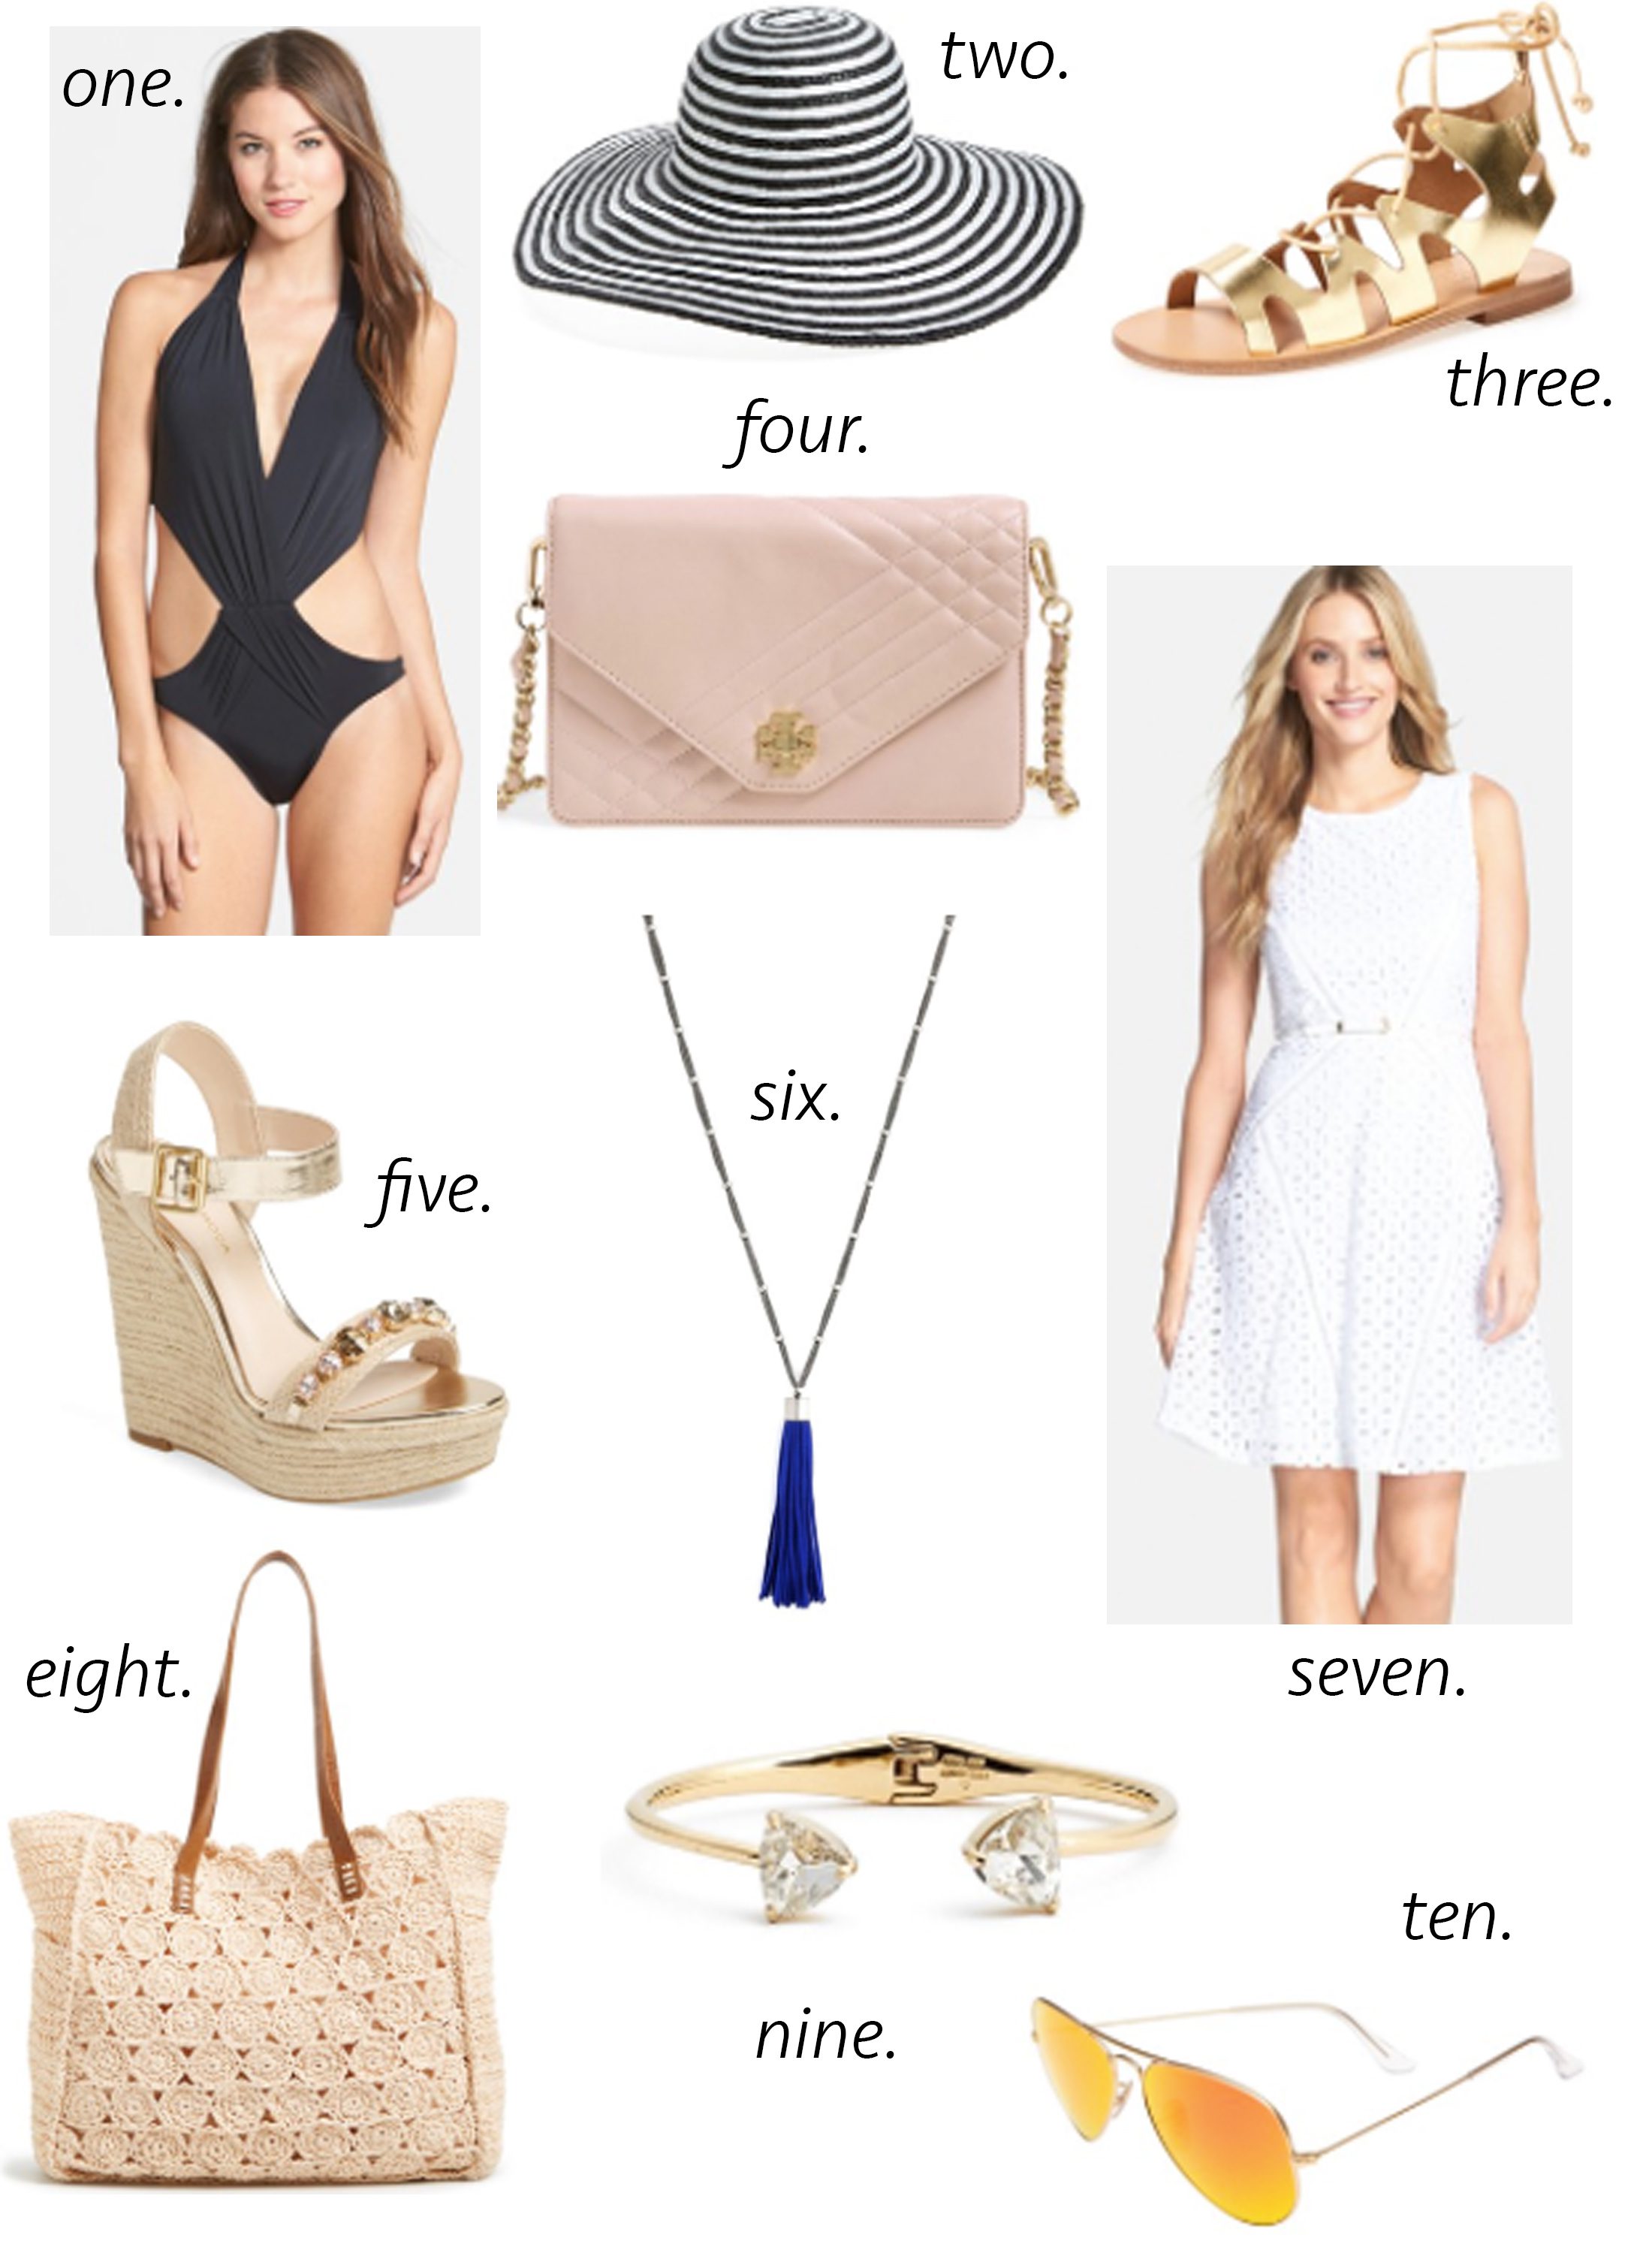 missyonmadison, packing guide, melissa tierney, san diego, del mar, race track, horse races, off to the races, what to wear to a horse race, what to wear in sandiego, california, la, travel, travel guide, white eyelet dress, tassel necklace, espadrille wedges, ray ban aviators, gladiator sandals, black bathing suit, sexy one piece, kate spade bangle, beach tote, floppy hat, striped floppy hat, straw tote, summer style, tory burch, tory burch cross body bag,